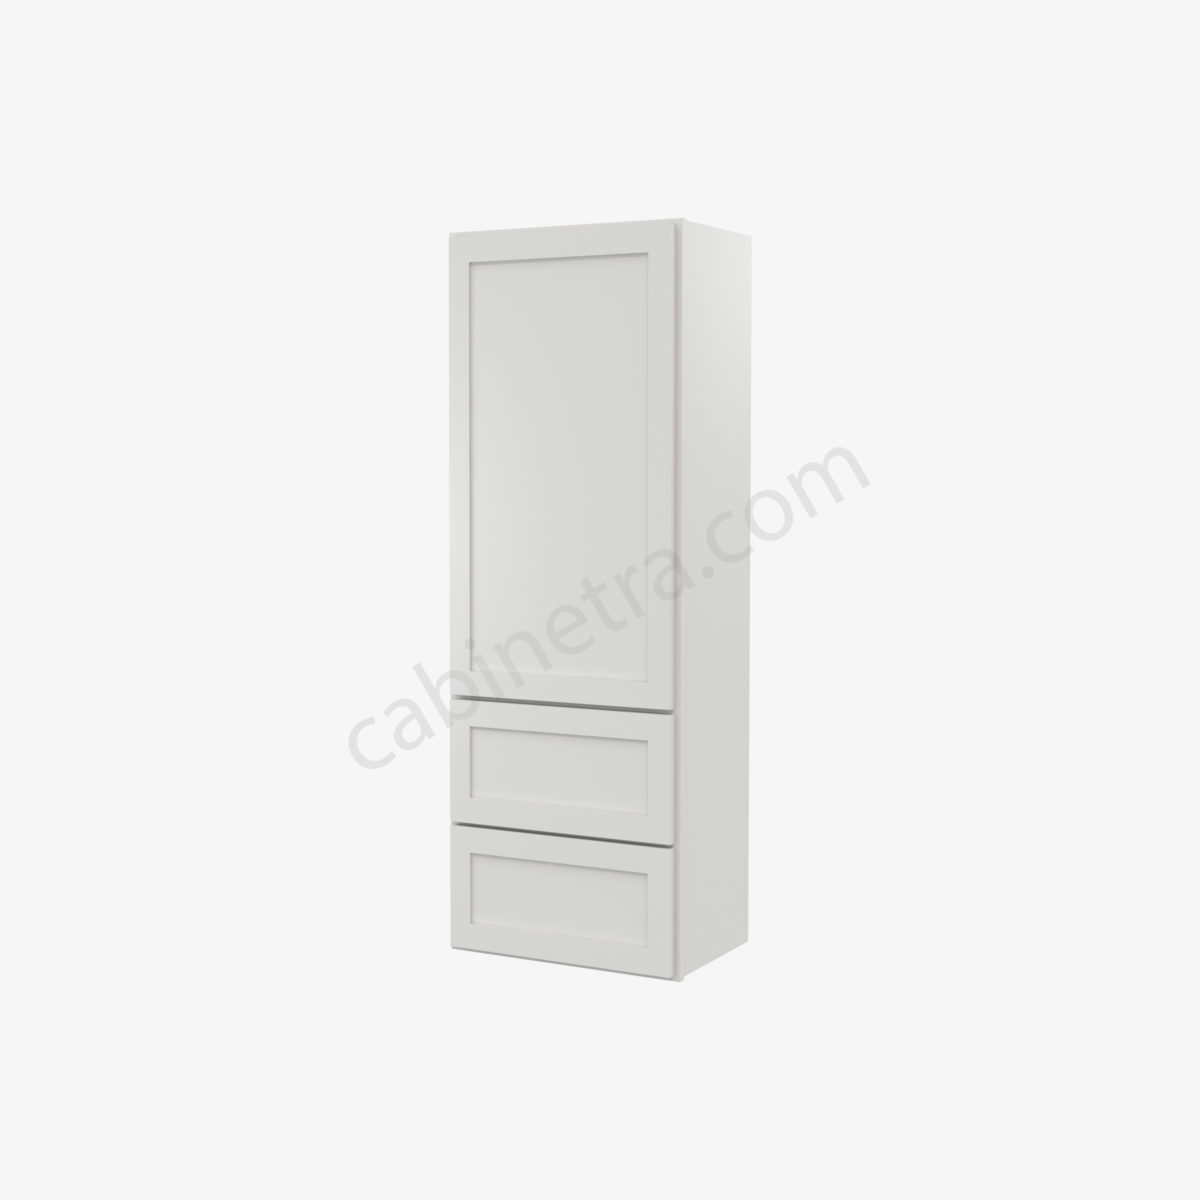 AW W2D1854 0 Forevermark Ice White Shaker Cabinetra scaled